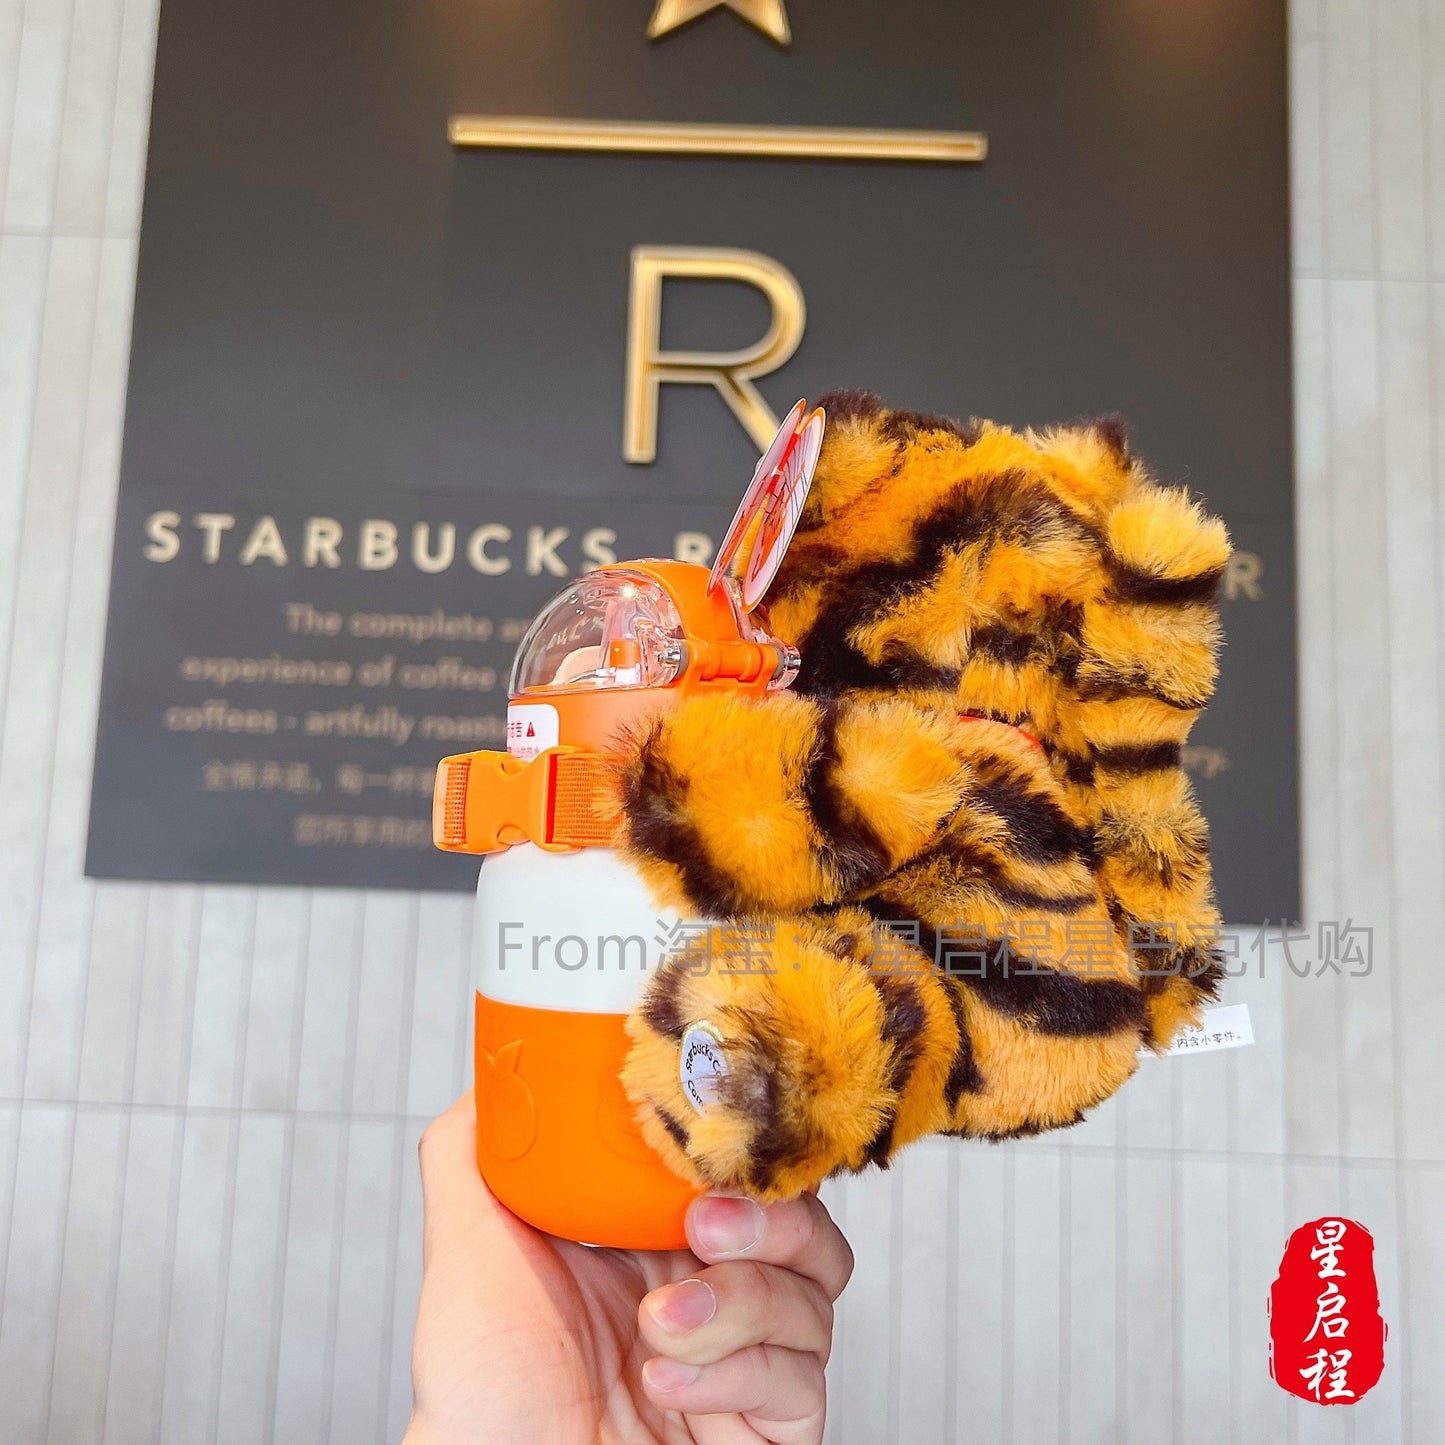 Starbucks China 375ml 2022 new year tiger series orange tiger stainless vacuum straw cup with tiger bear plush toy cup holder